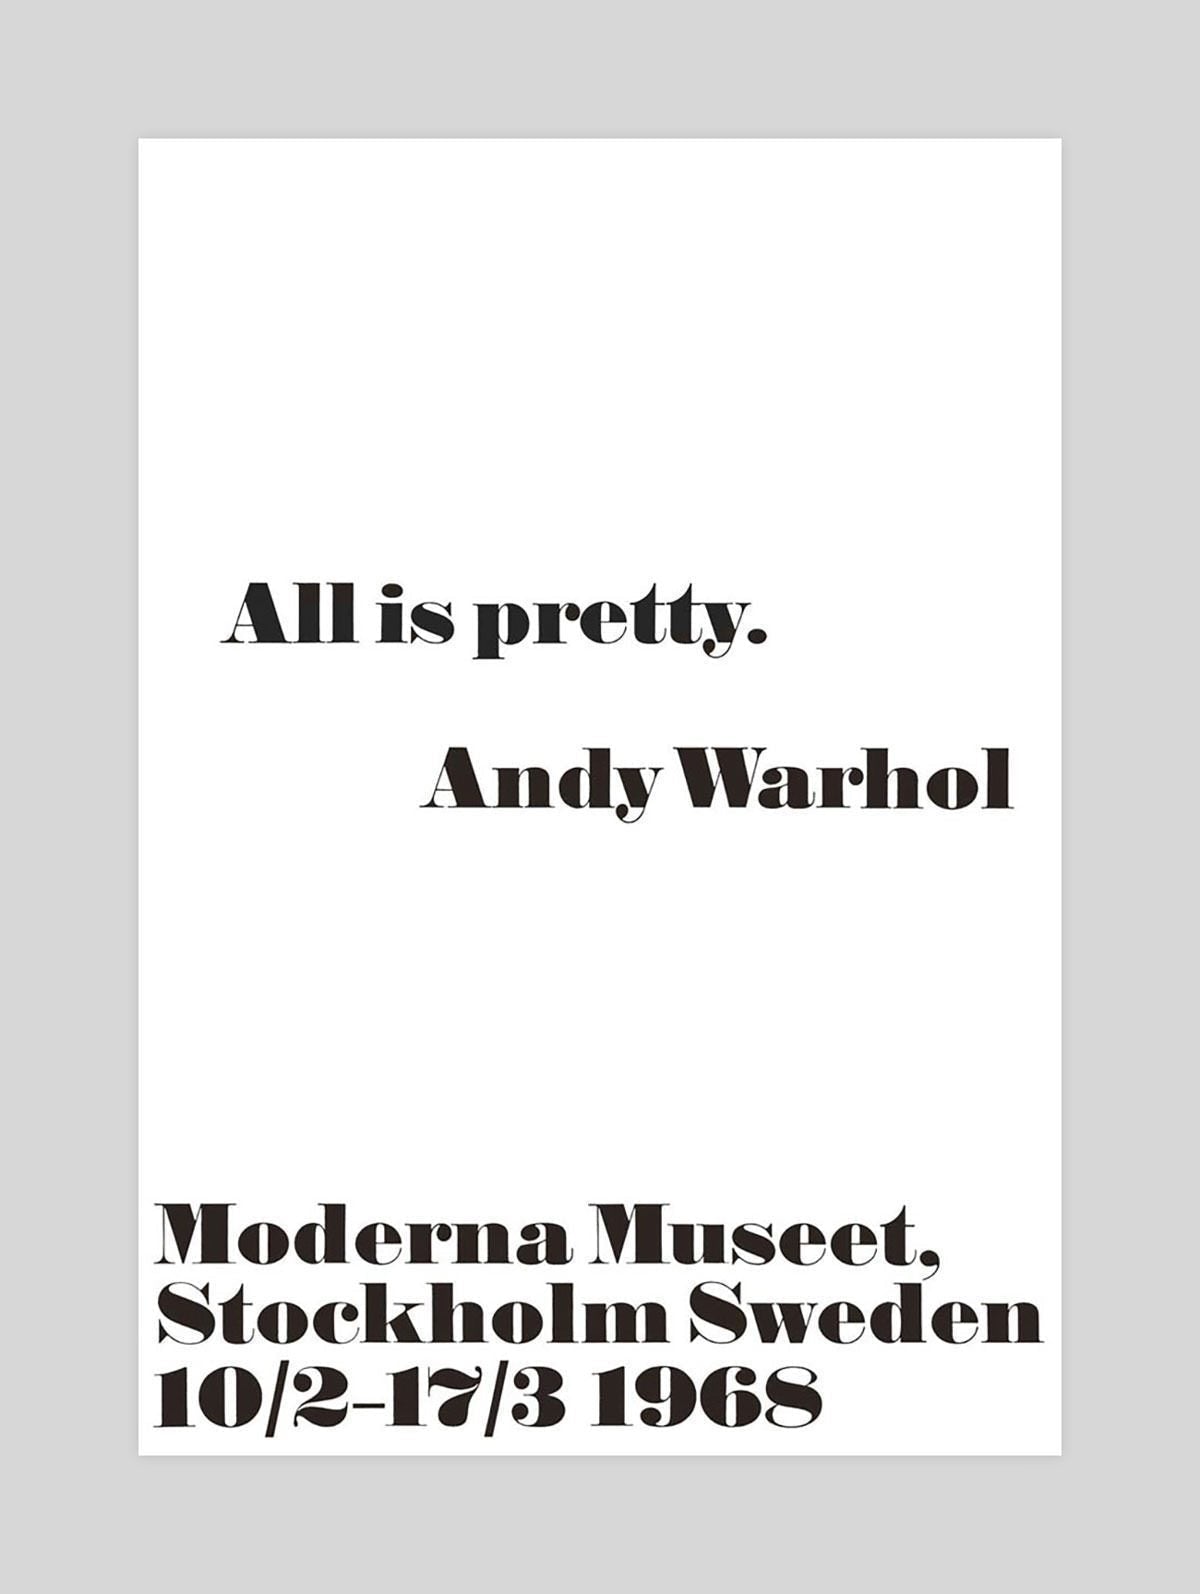 All is by Andy Warhol Art Print Poster | Pop Motif